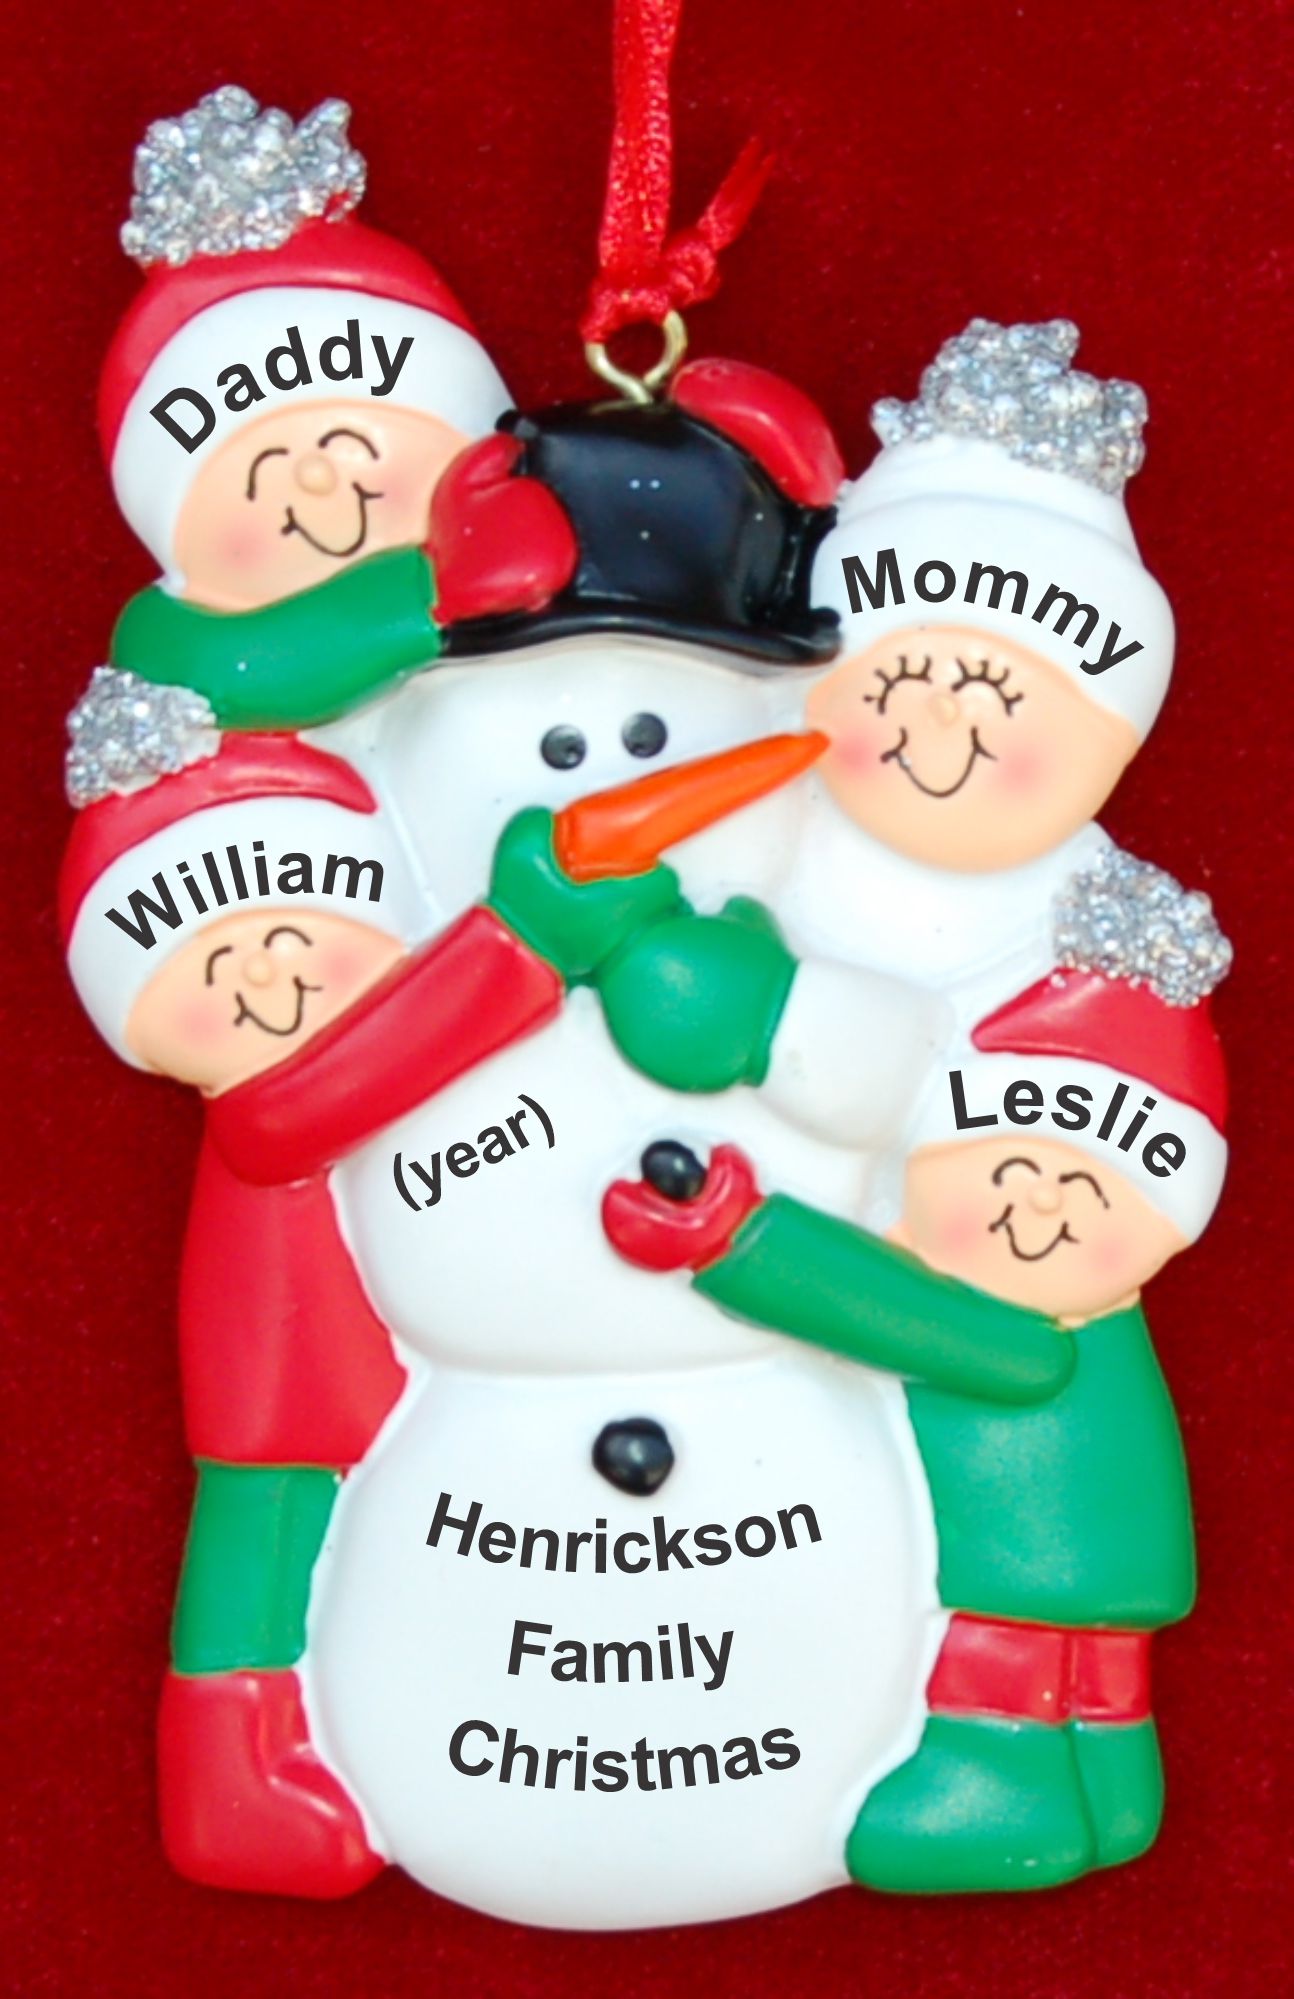 Family Christmas Ornament Making Snowman for 4 by Russell Rhodes